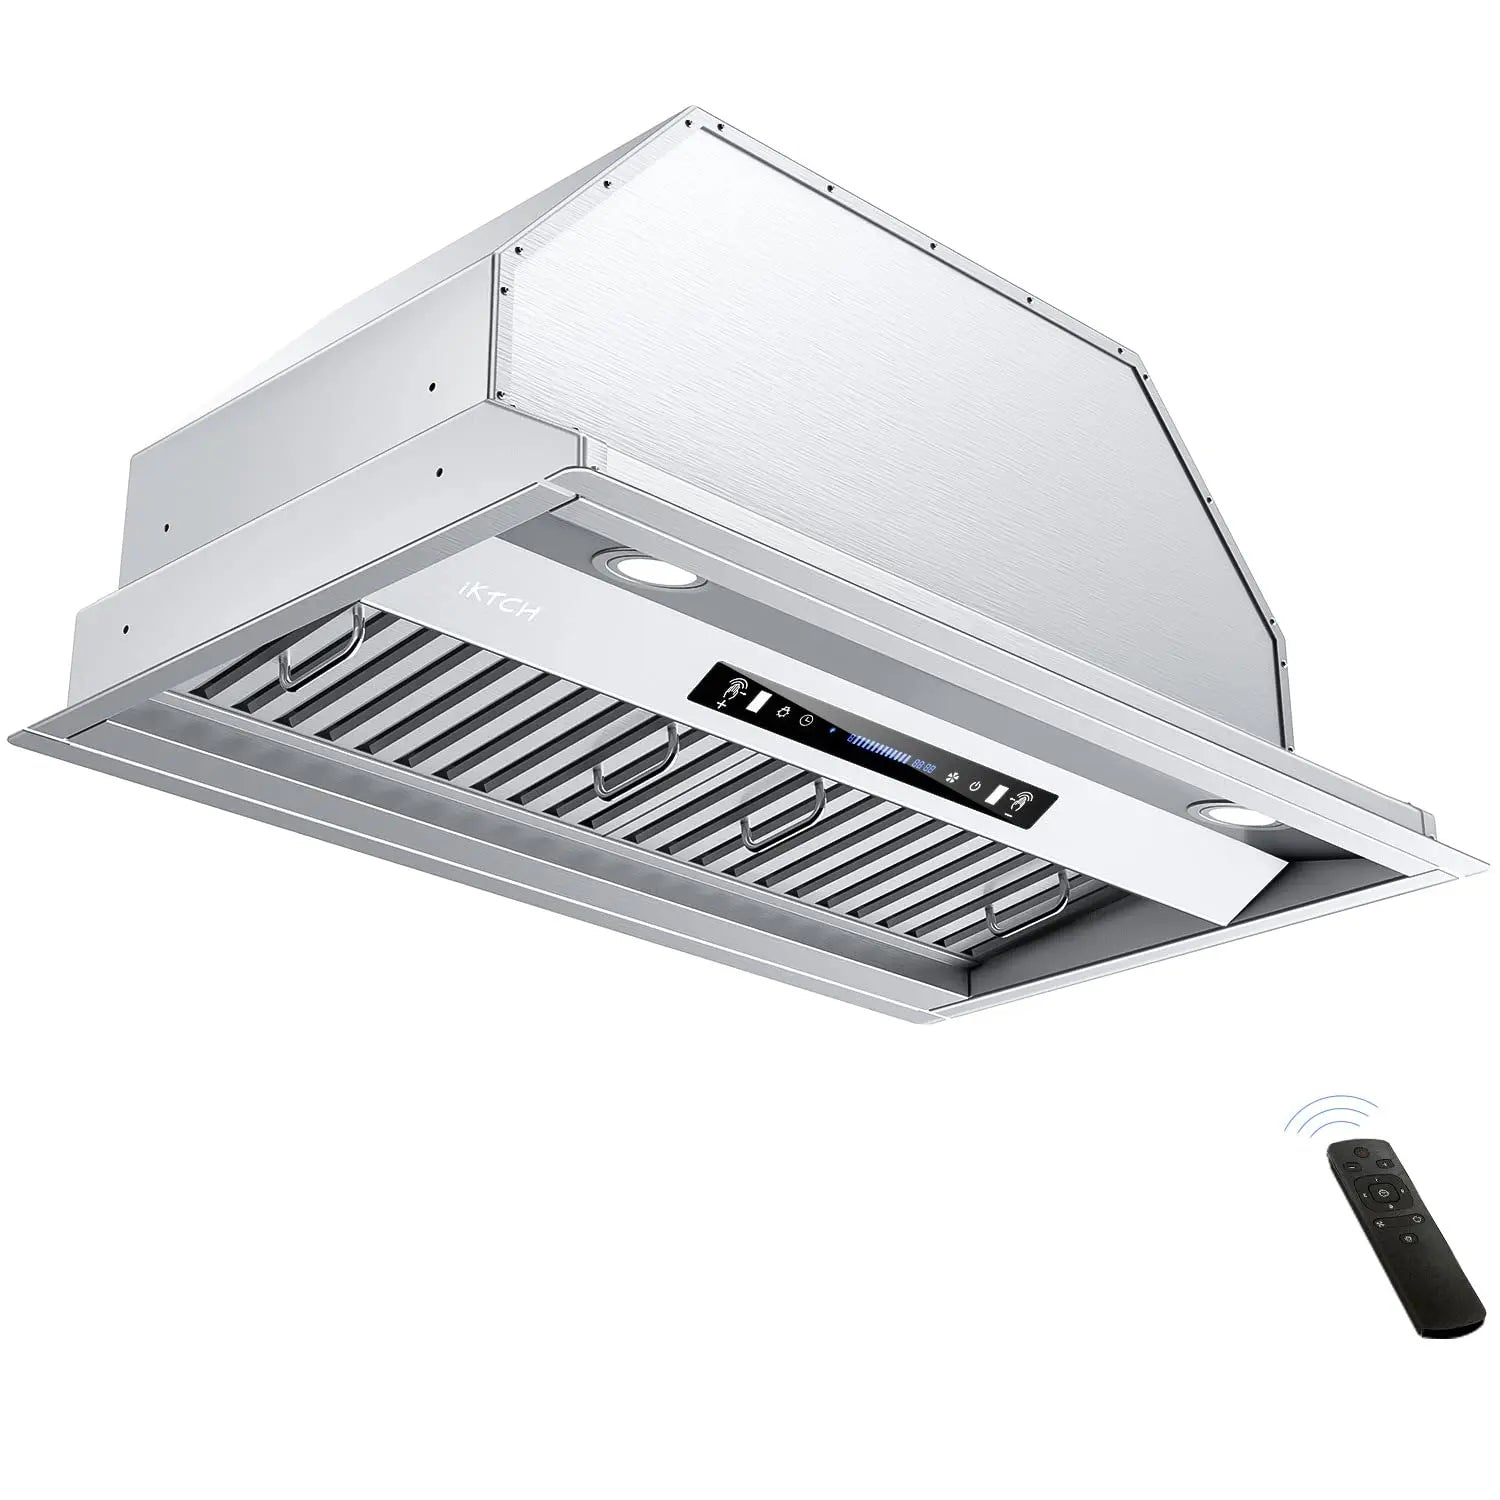 IKTCH IKC02-30B IKTcH Upgrated 30Under cabinet Range Hood, 900 cFM Ducted Range  Hood with 4 Speed Fan, Black Stainless Steel & Tempered glass Ra